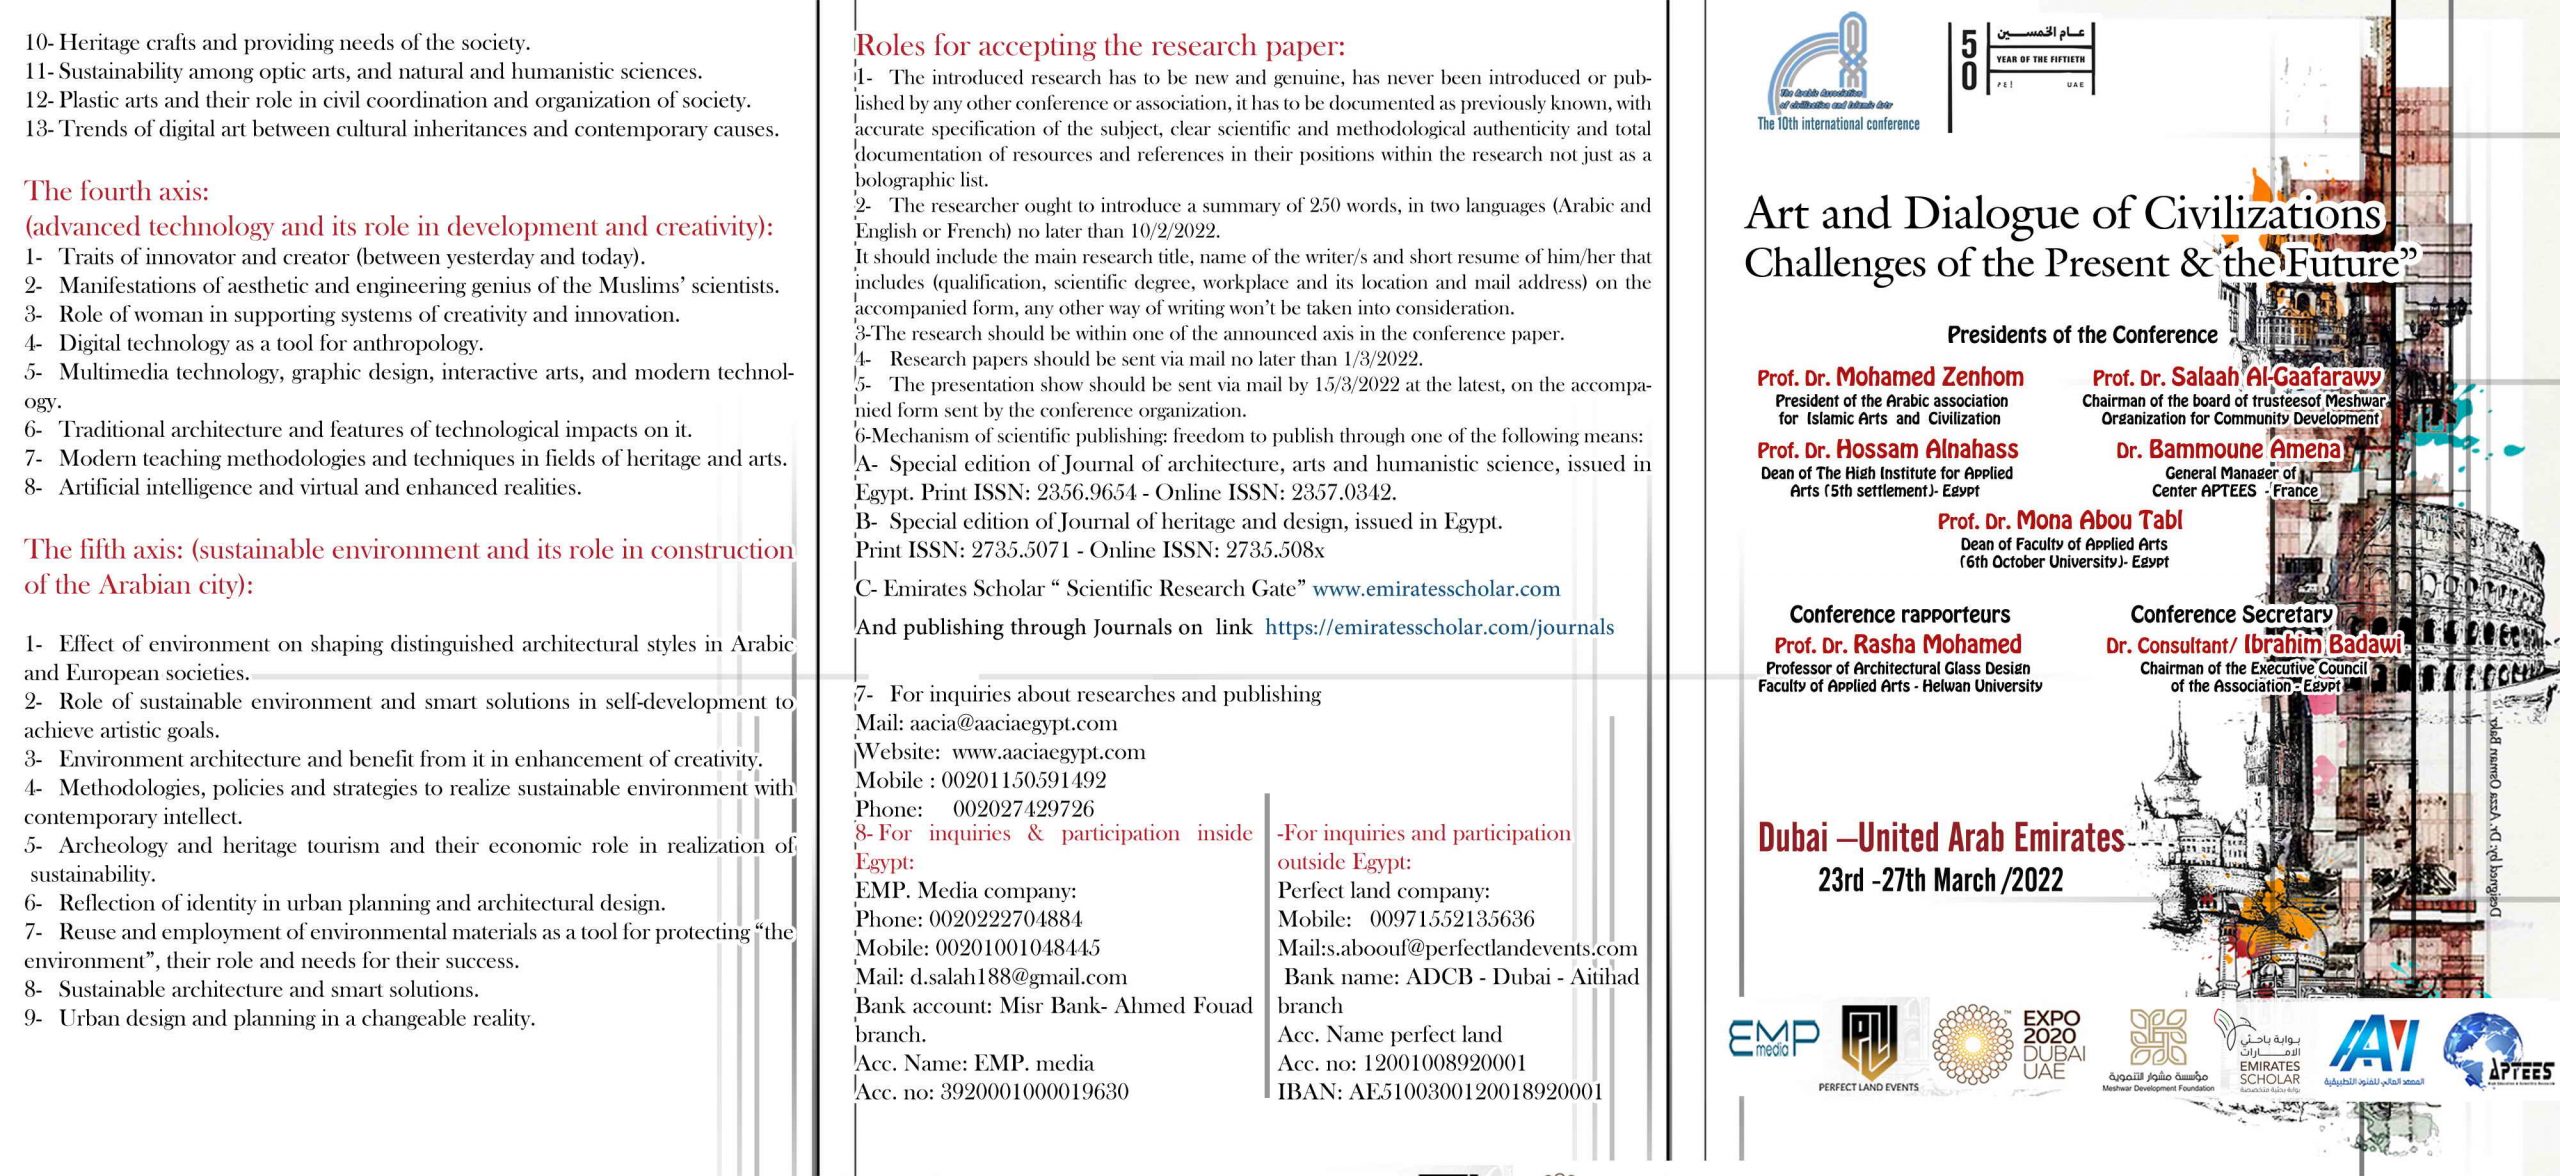 The Tenth International Conference “Art and the Dialogue of Civilizations: Present and Future Challenges”